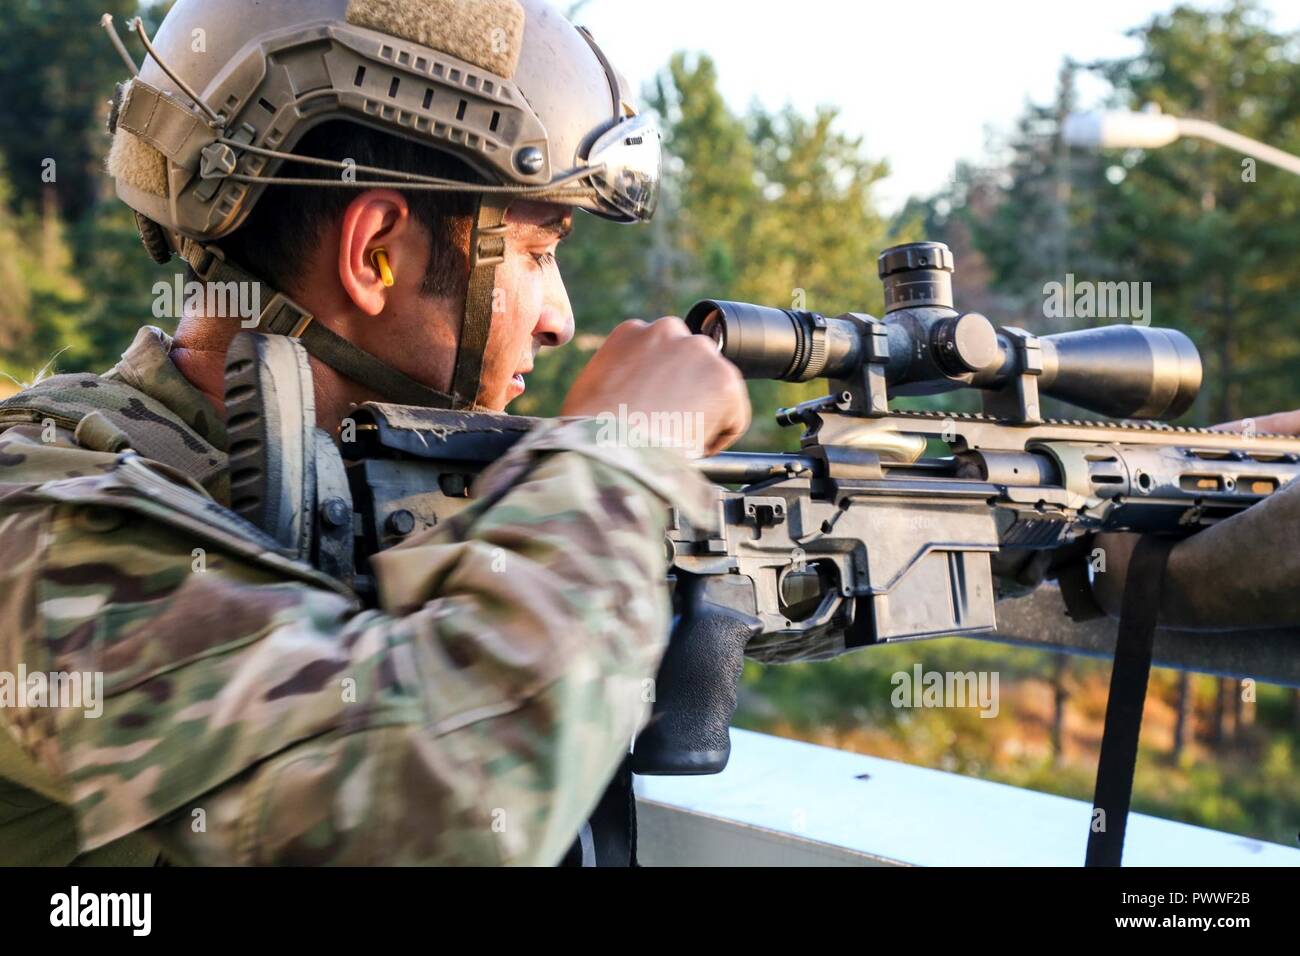 A Green Beret assigned to 1st Battalion, 10th Special Forces Group